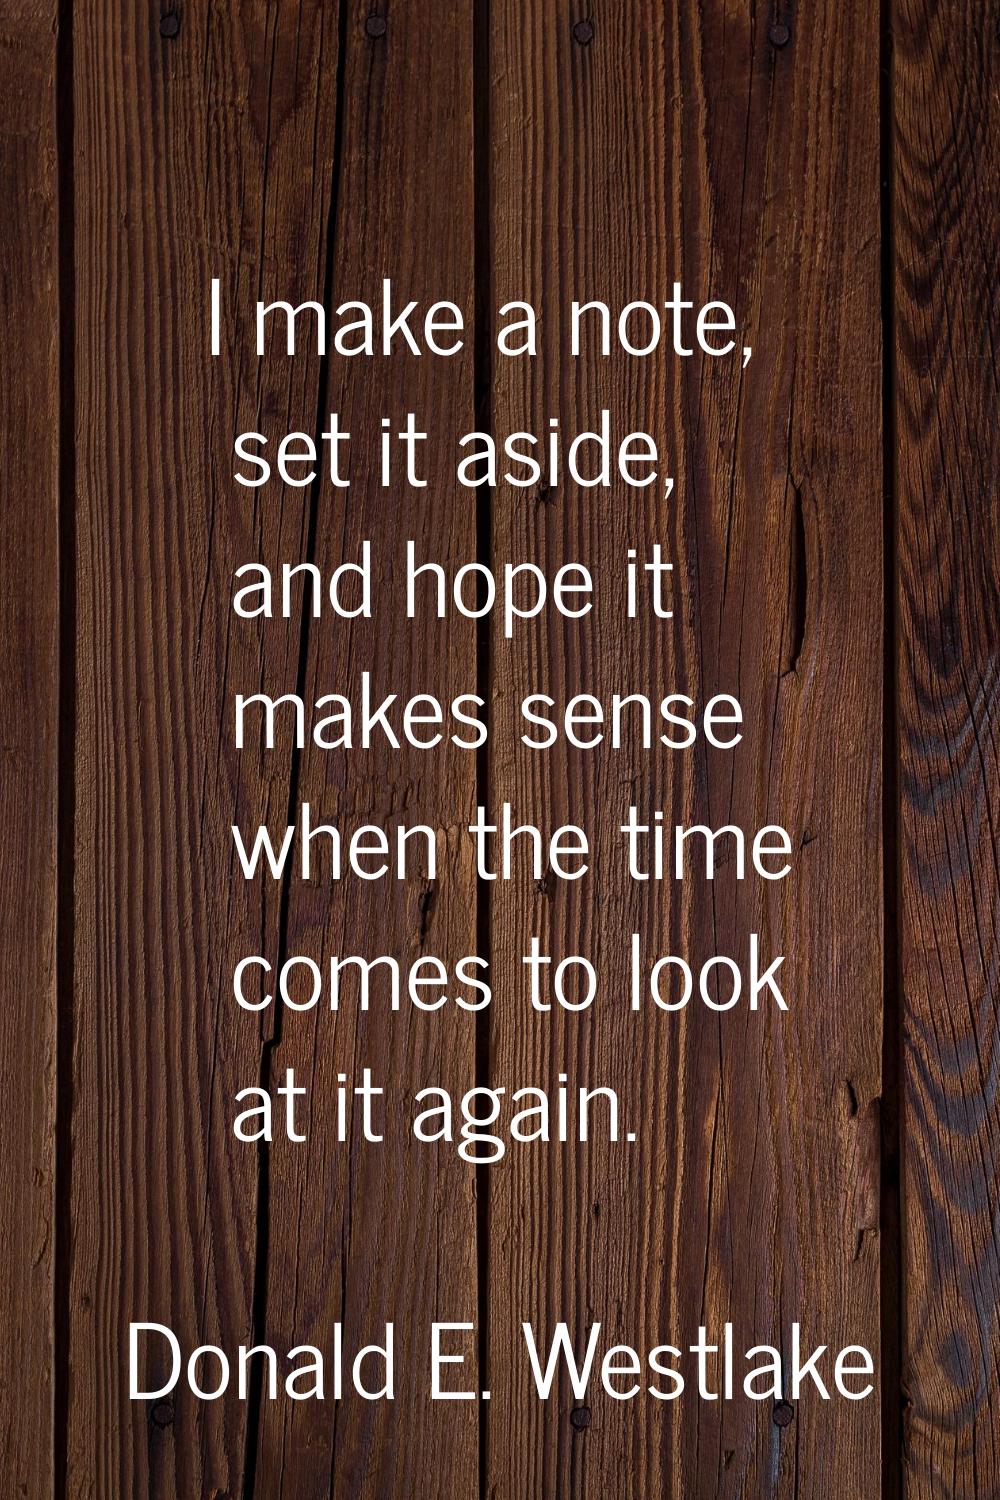 I make a note, set it aside, and hope it makes sense when the time comes to look at it again.